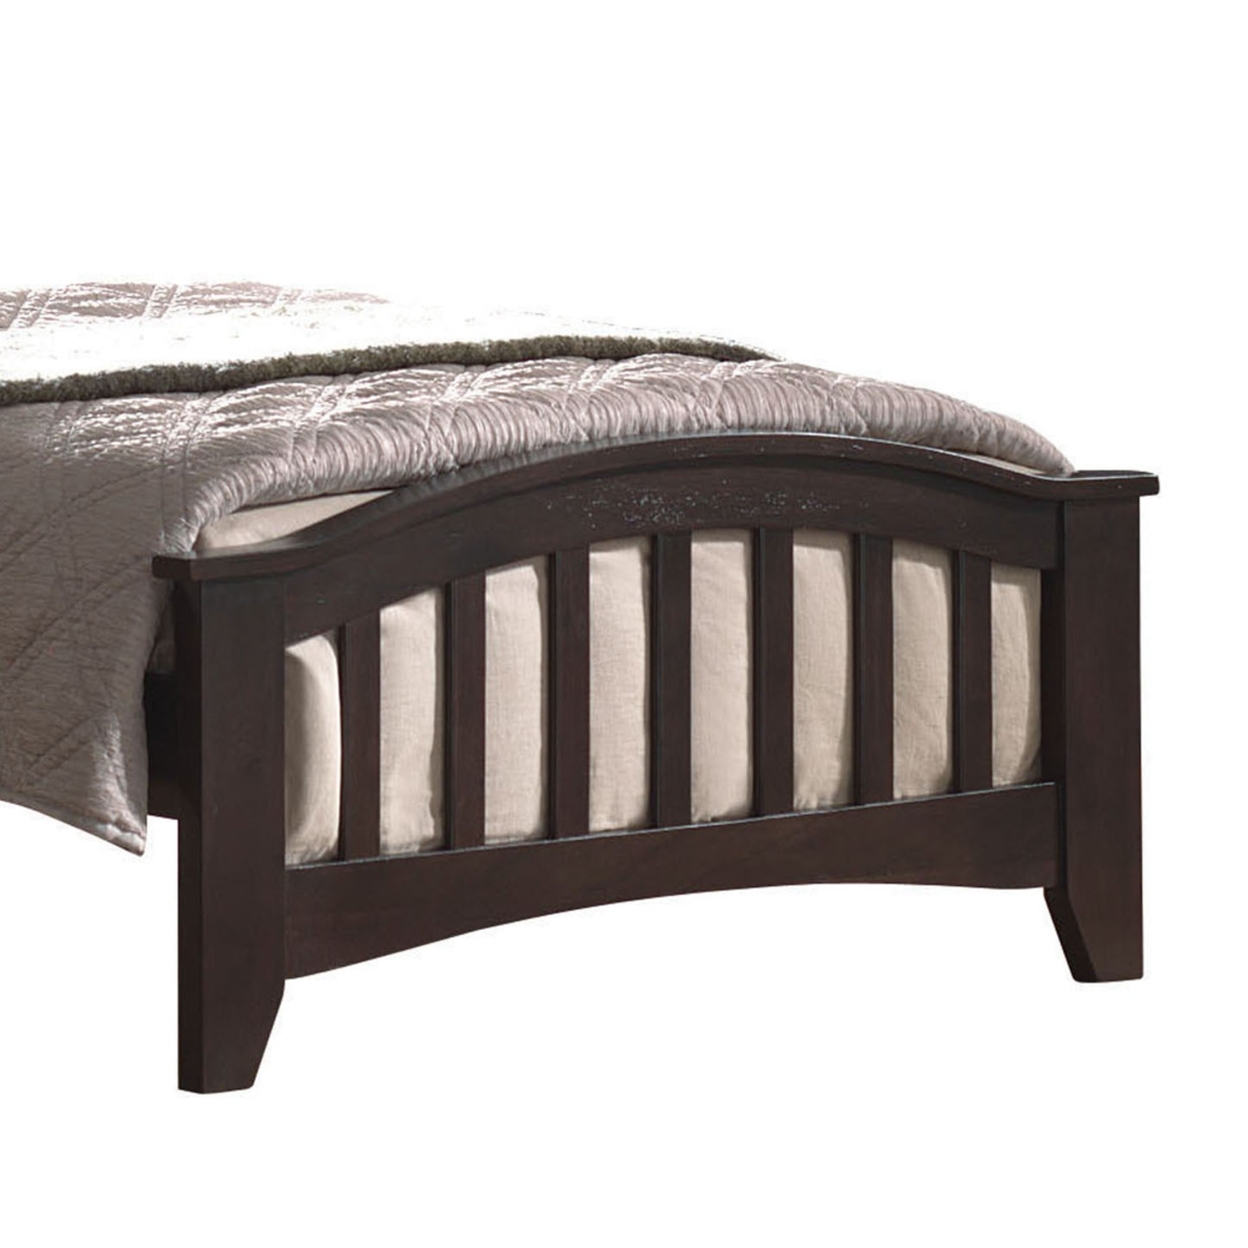 Wooden Twin Size Bed With Slated Design Headboard And Footboard, Dark Brown- Saltoro Sherpi